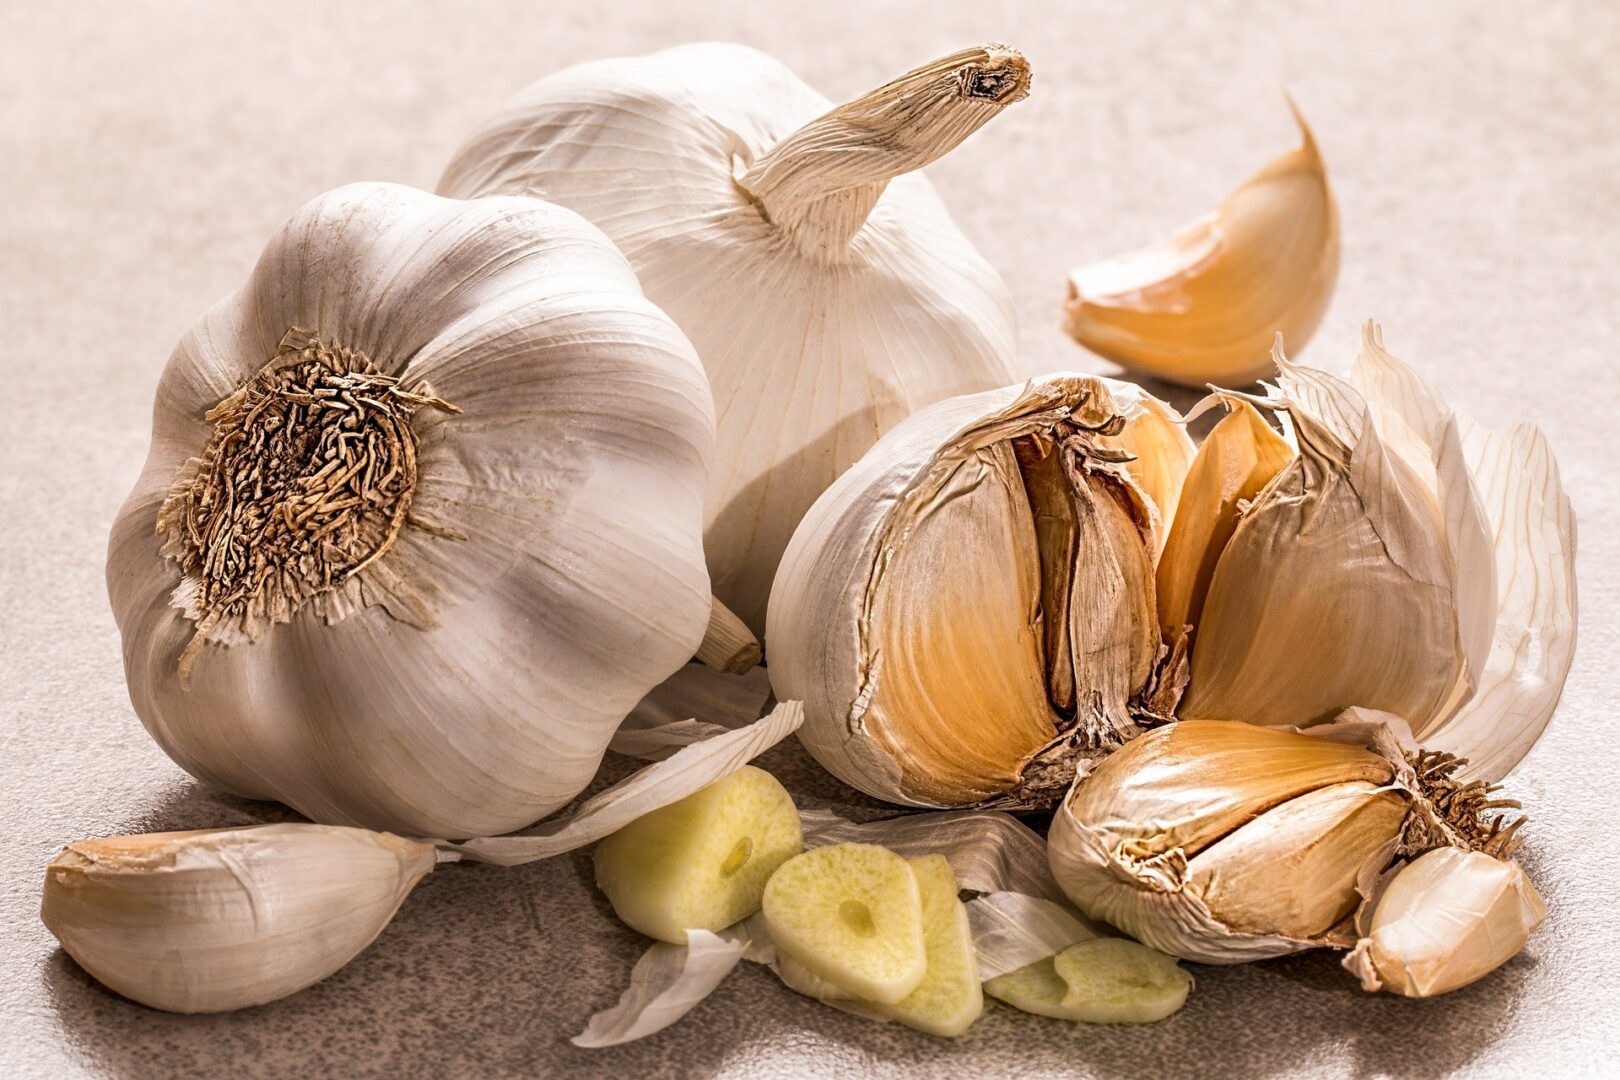 Garlic, Onions, and the Rest of the Allium Family